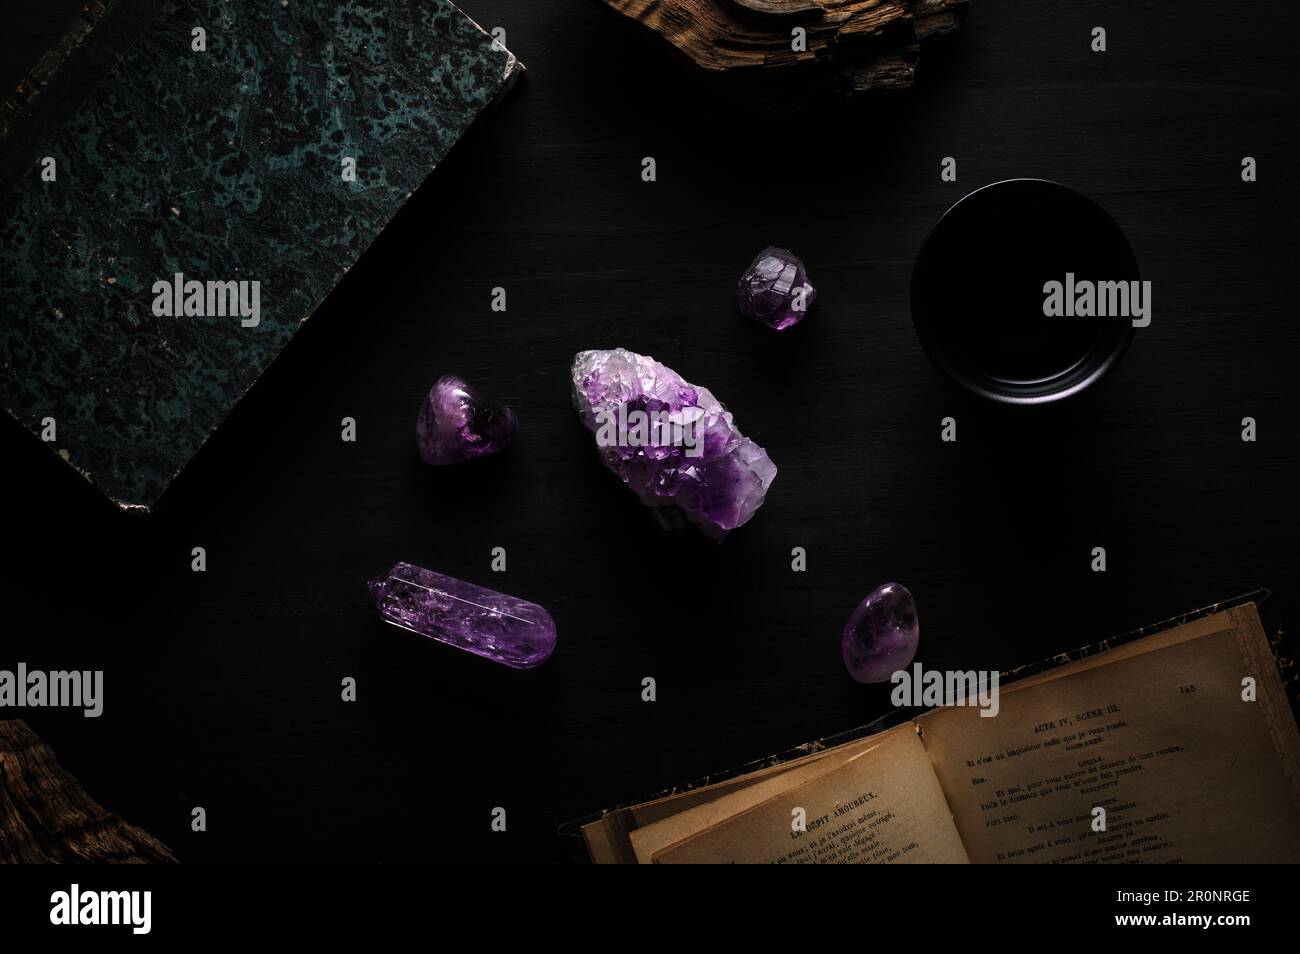 Amethyst gemstone detail on black table with french book, wood piece. Dark gothic witch top view background Stock Photo